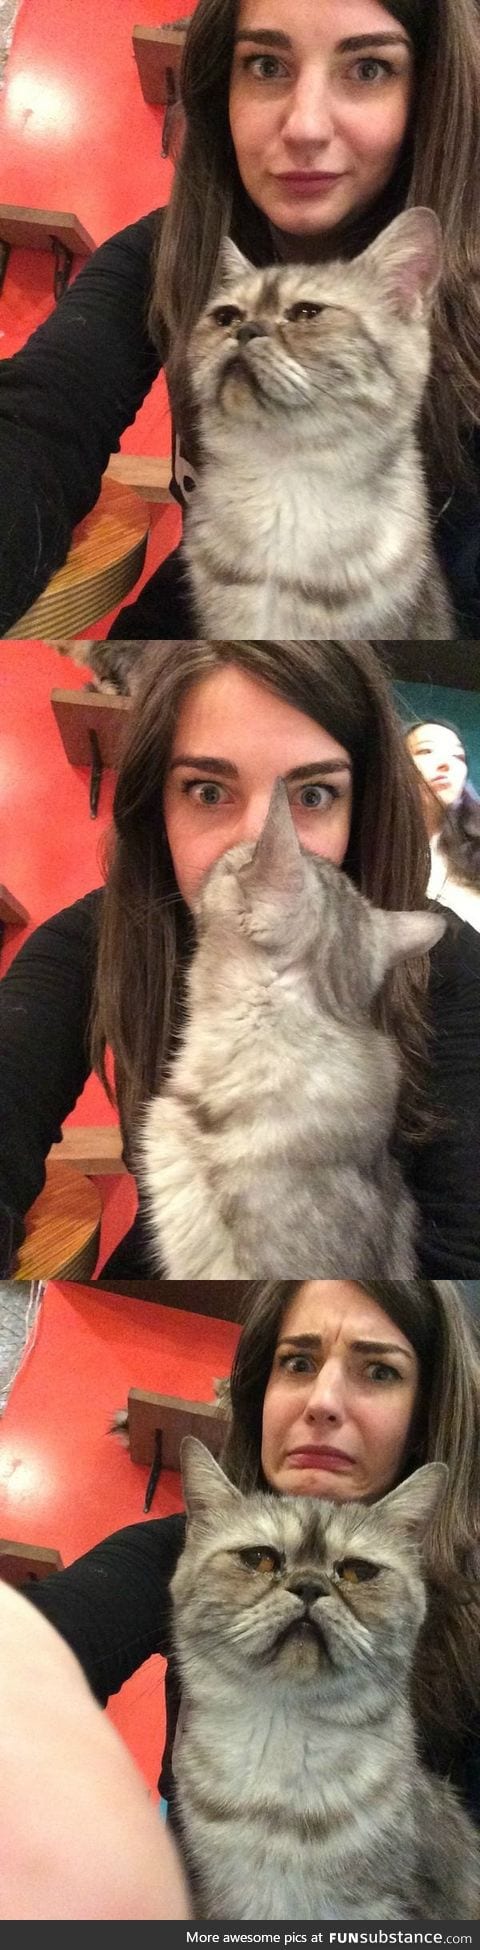 She was taking selfies with this cat and he surprise-kissed her